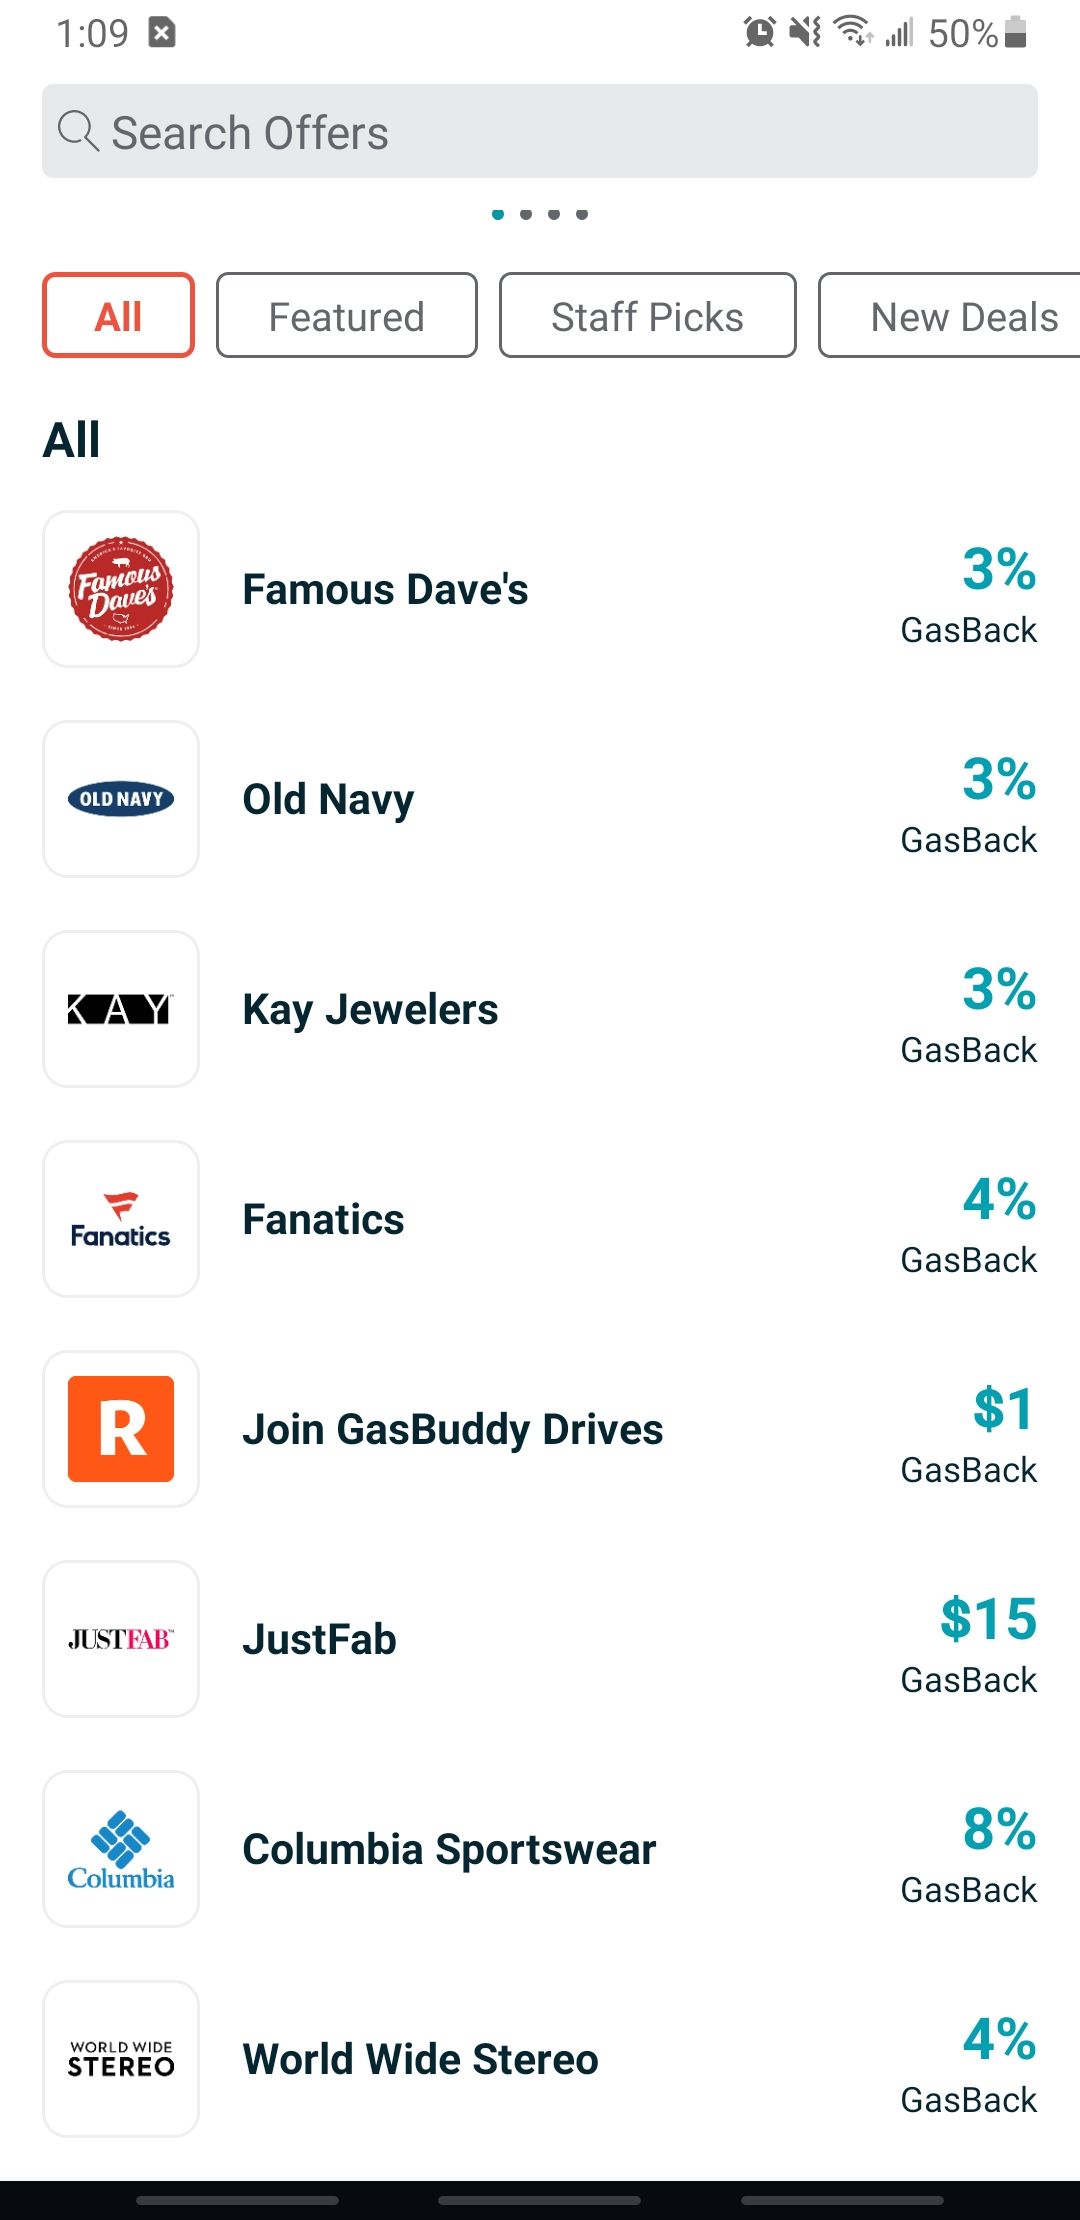 gasbuddy app cashback offers from different retailers